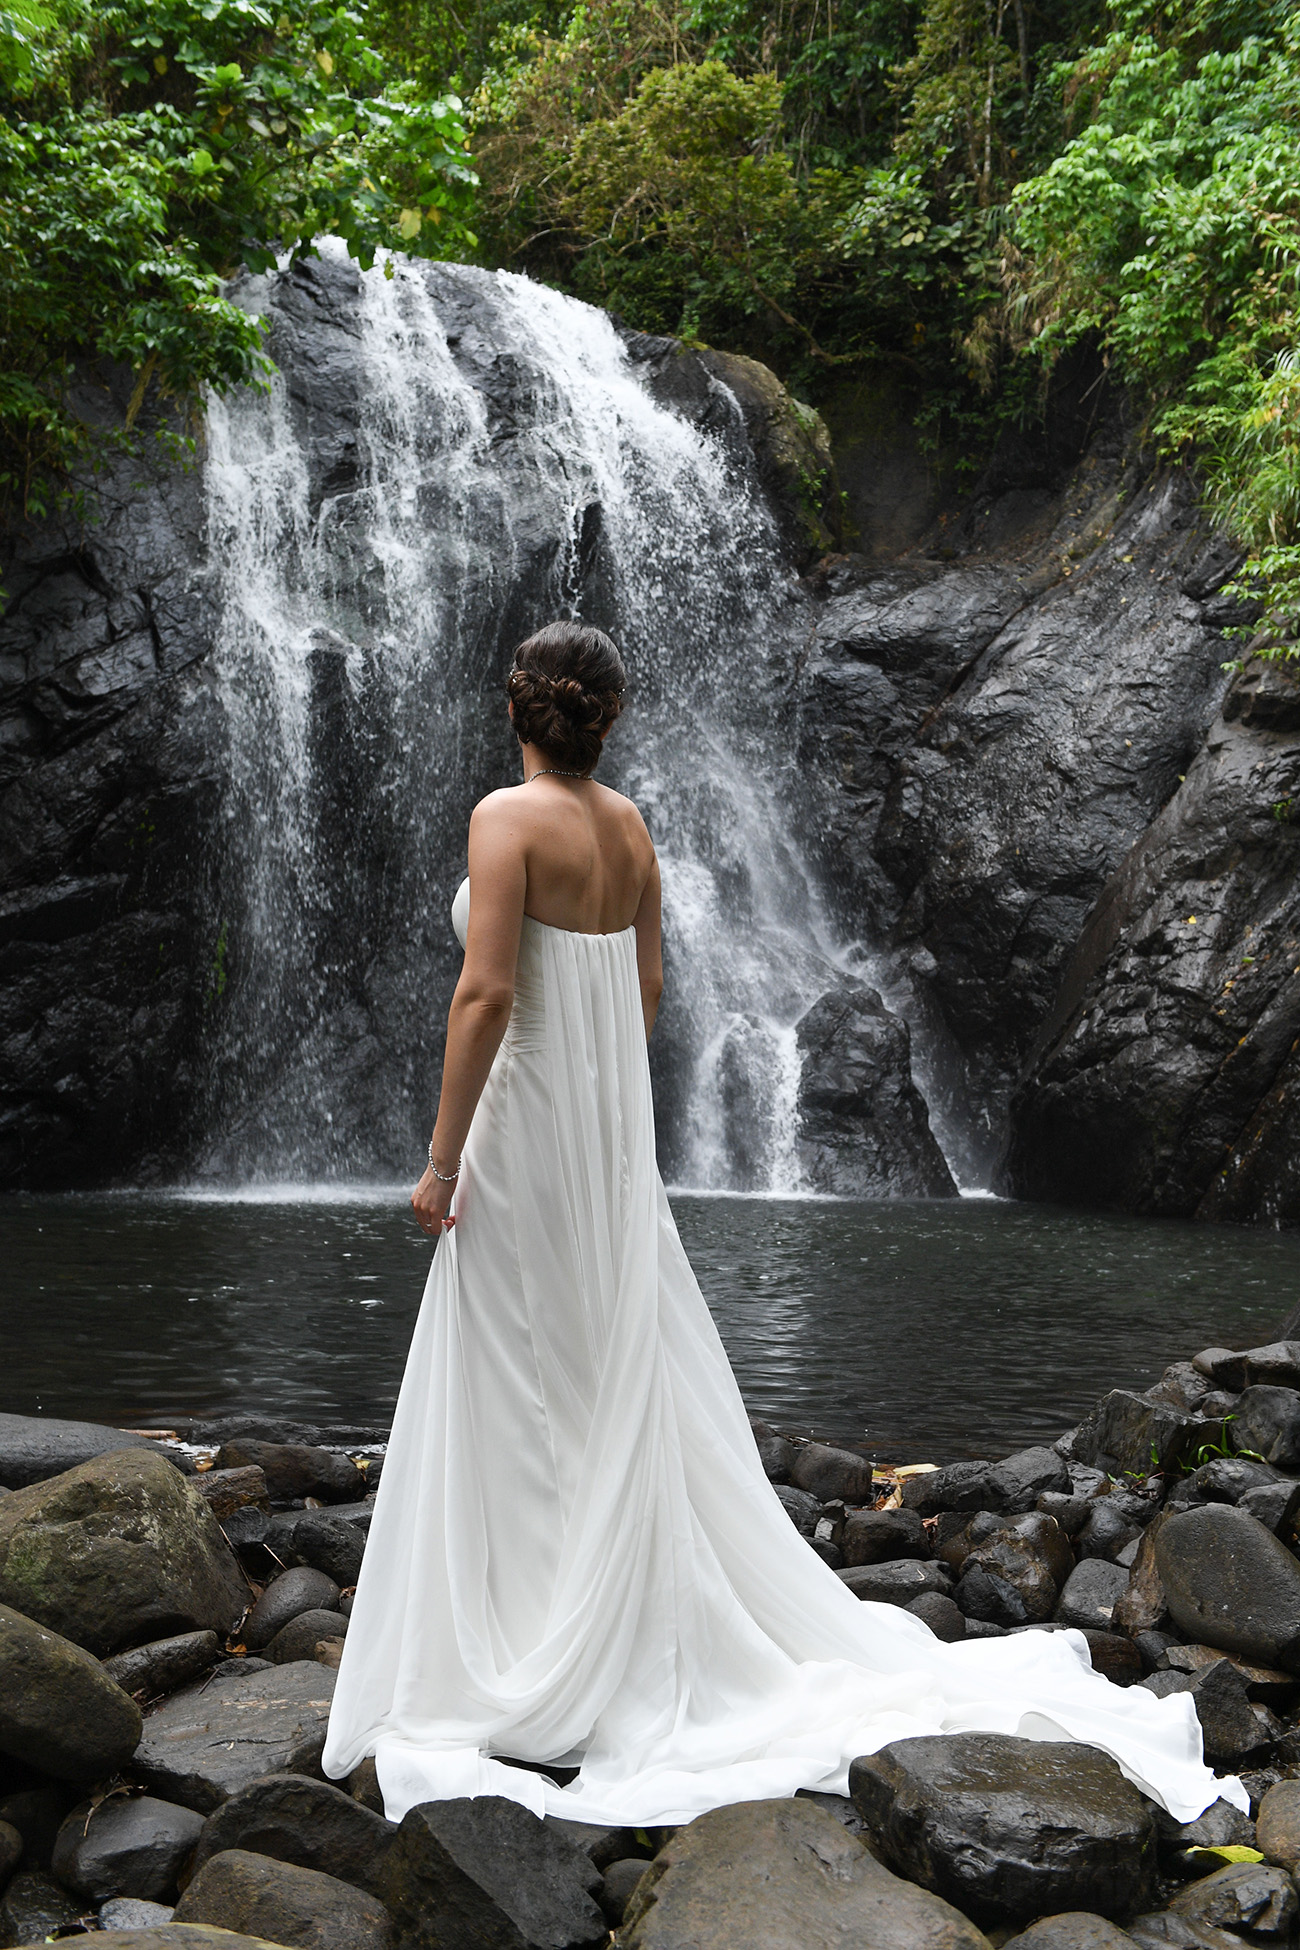 The bride in long white wedding dress stands next to waterfall